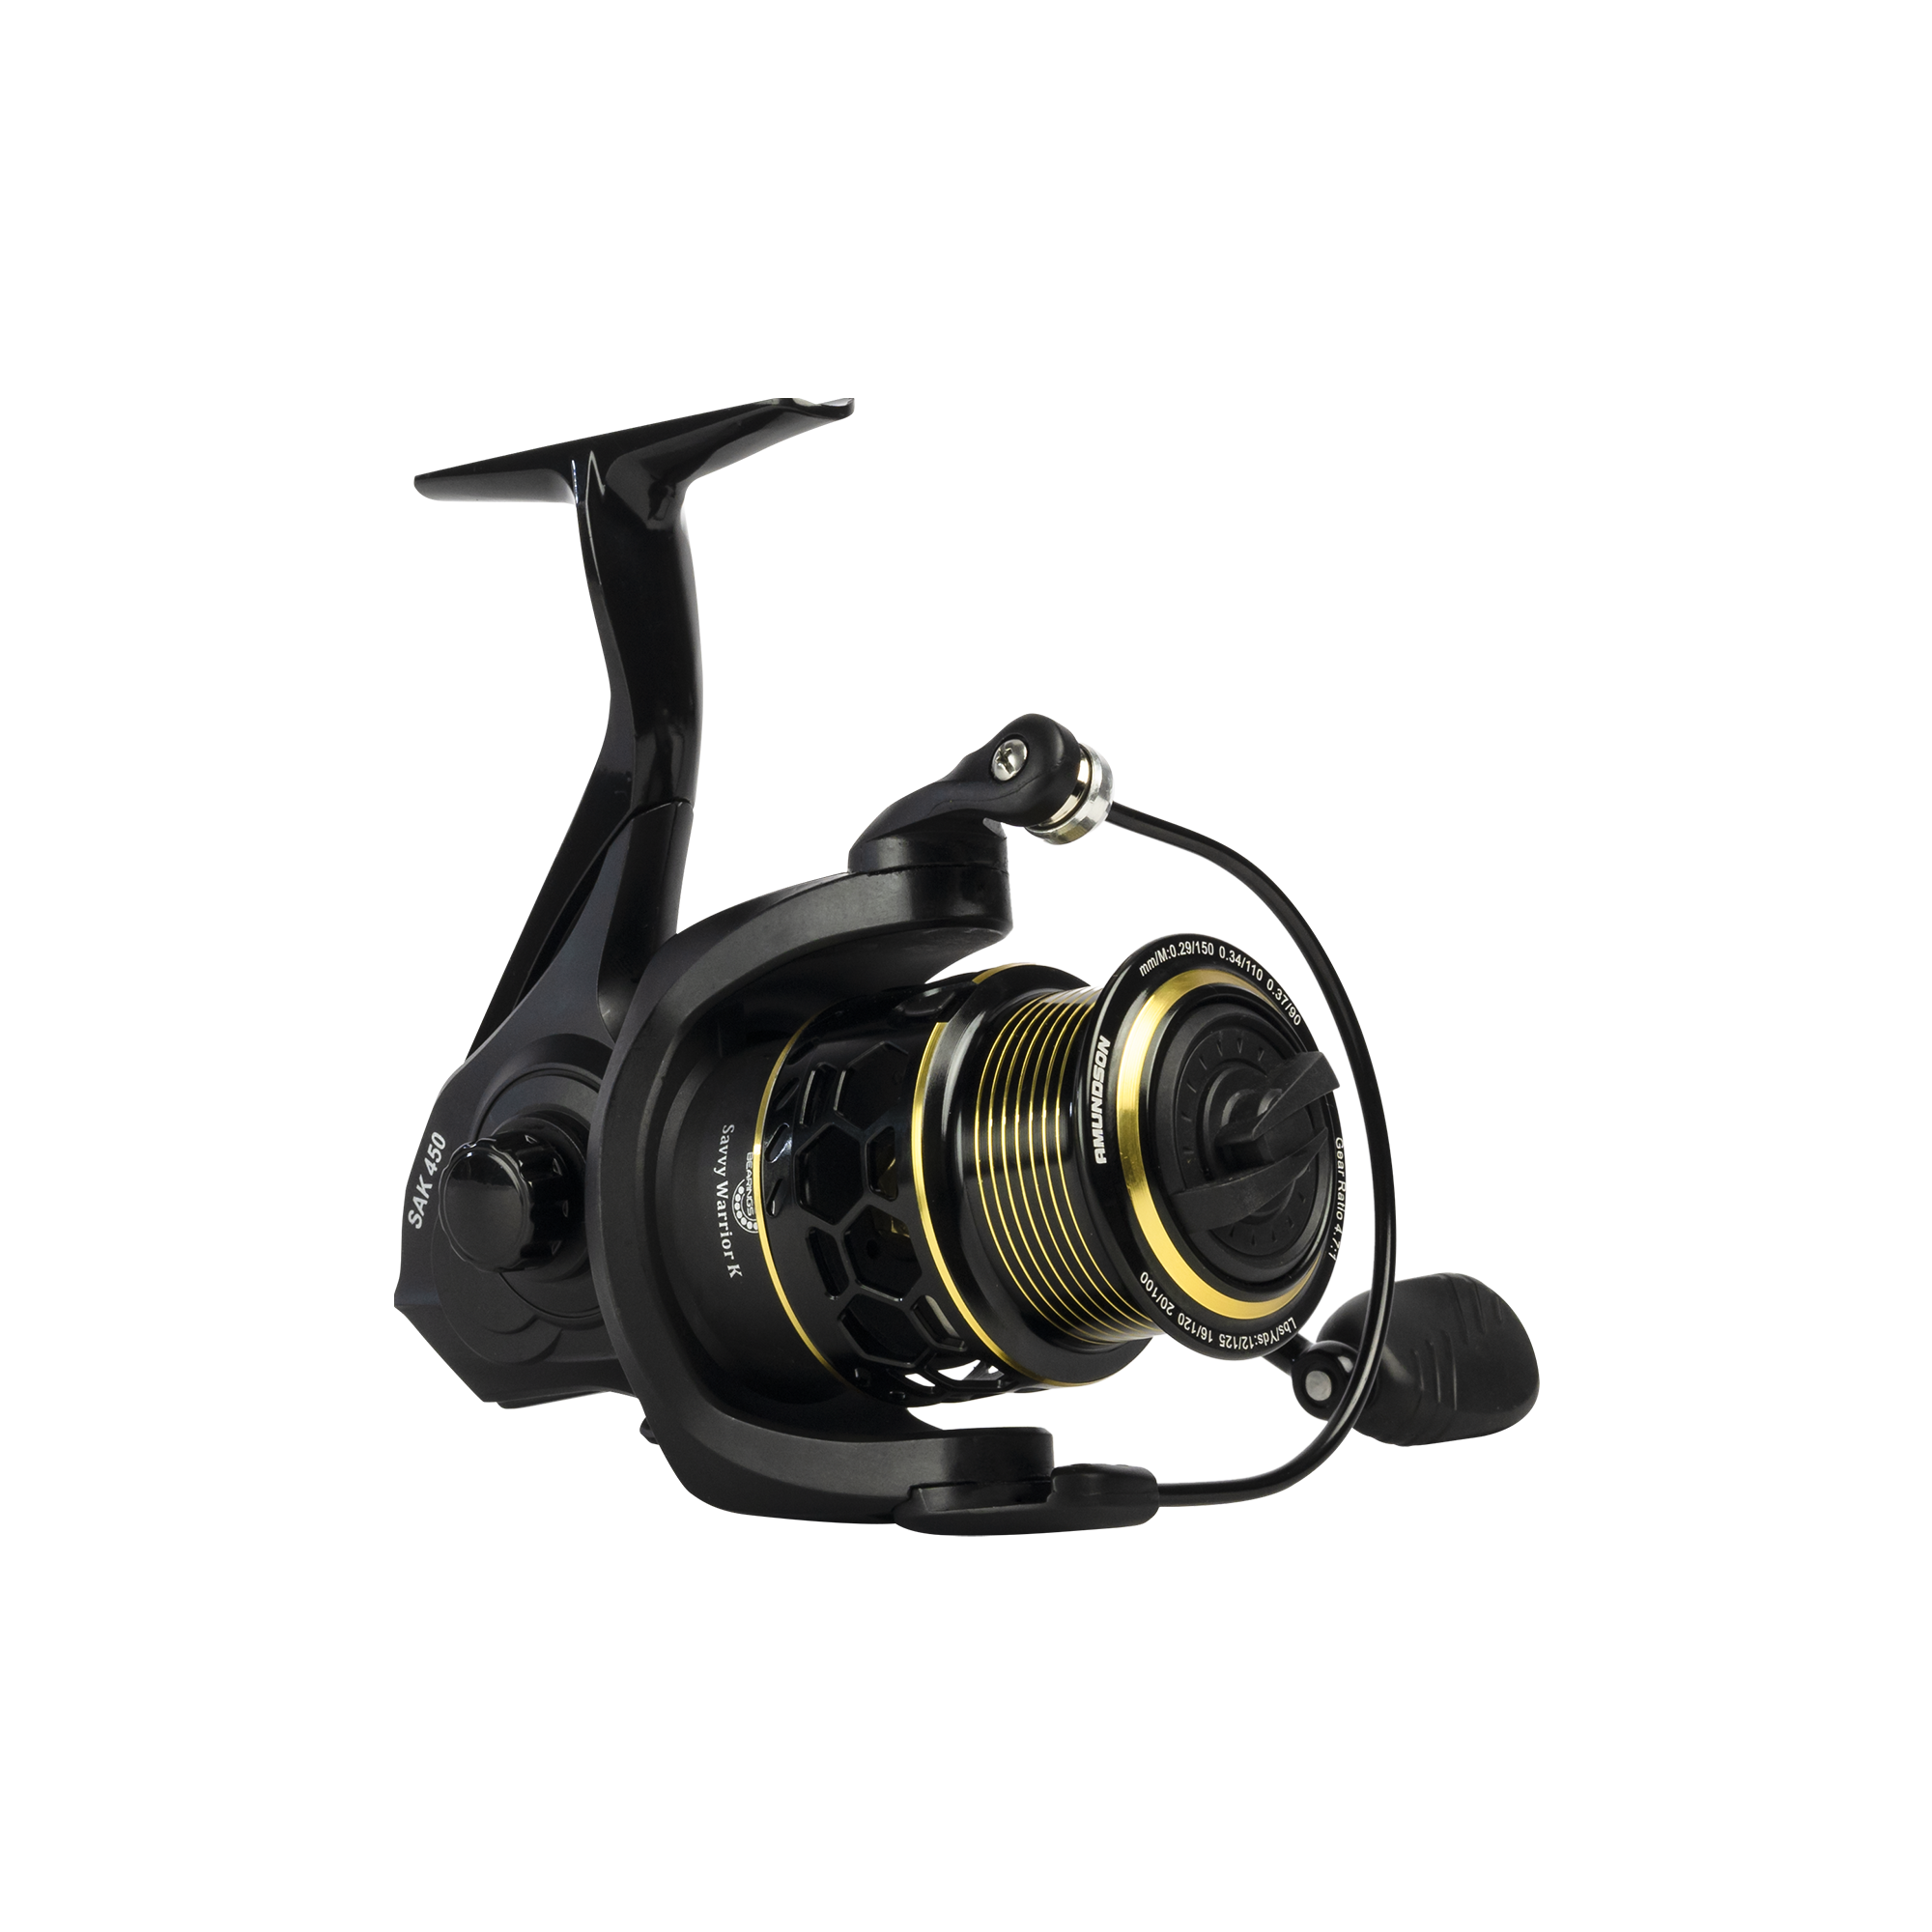 Just got restocked with the limited edition matte black Accurate jigging  reels! #accuratefishing #anglerschoicetackle @anglerschoicetackle